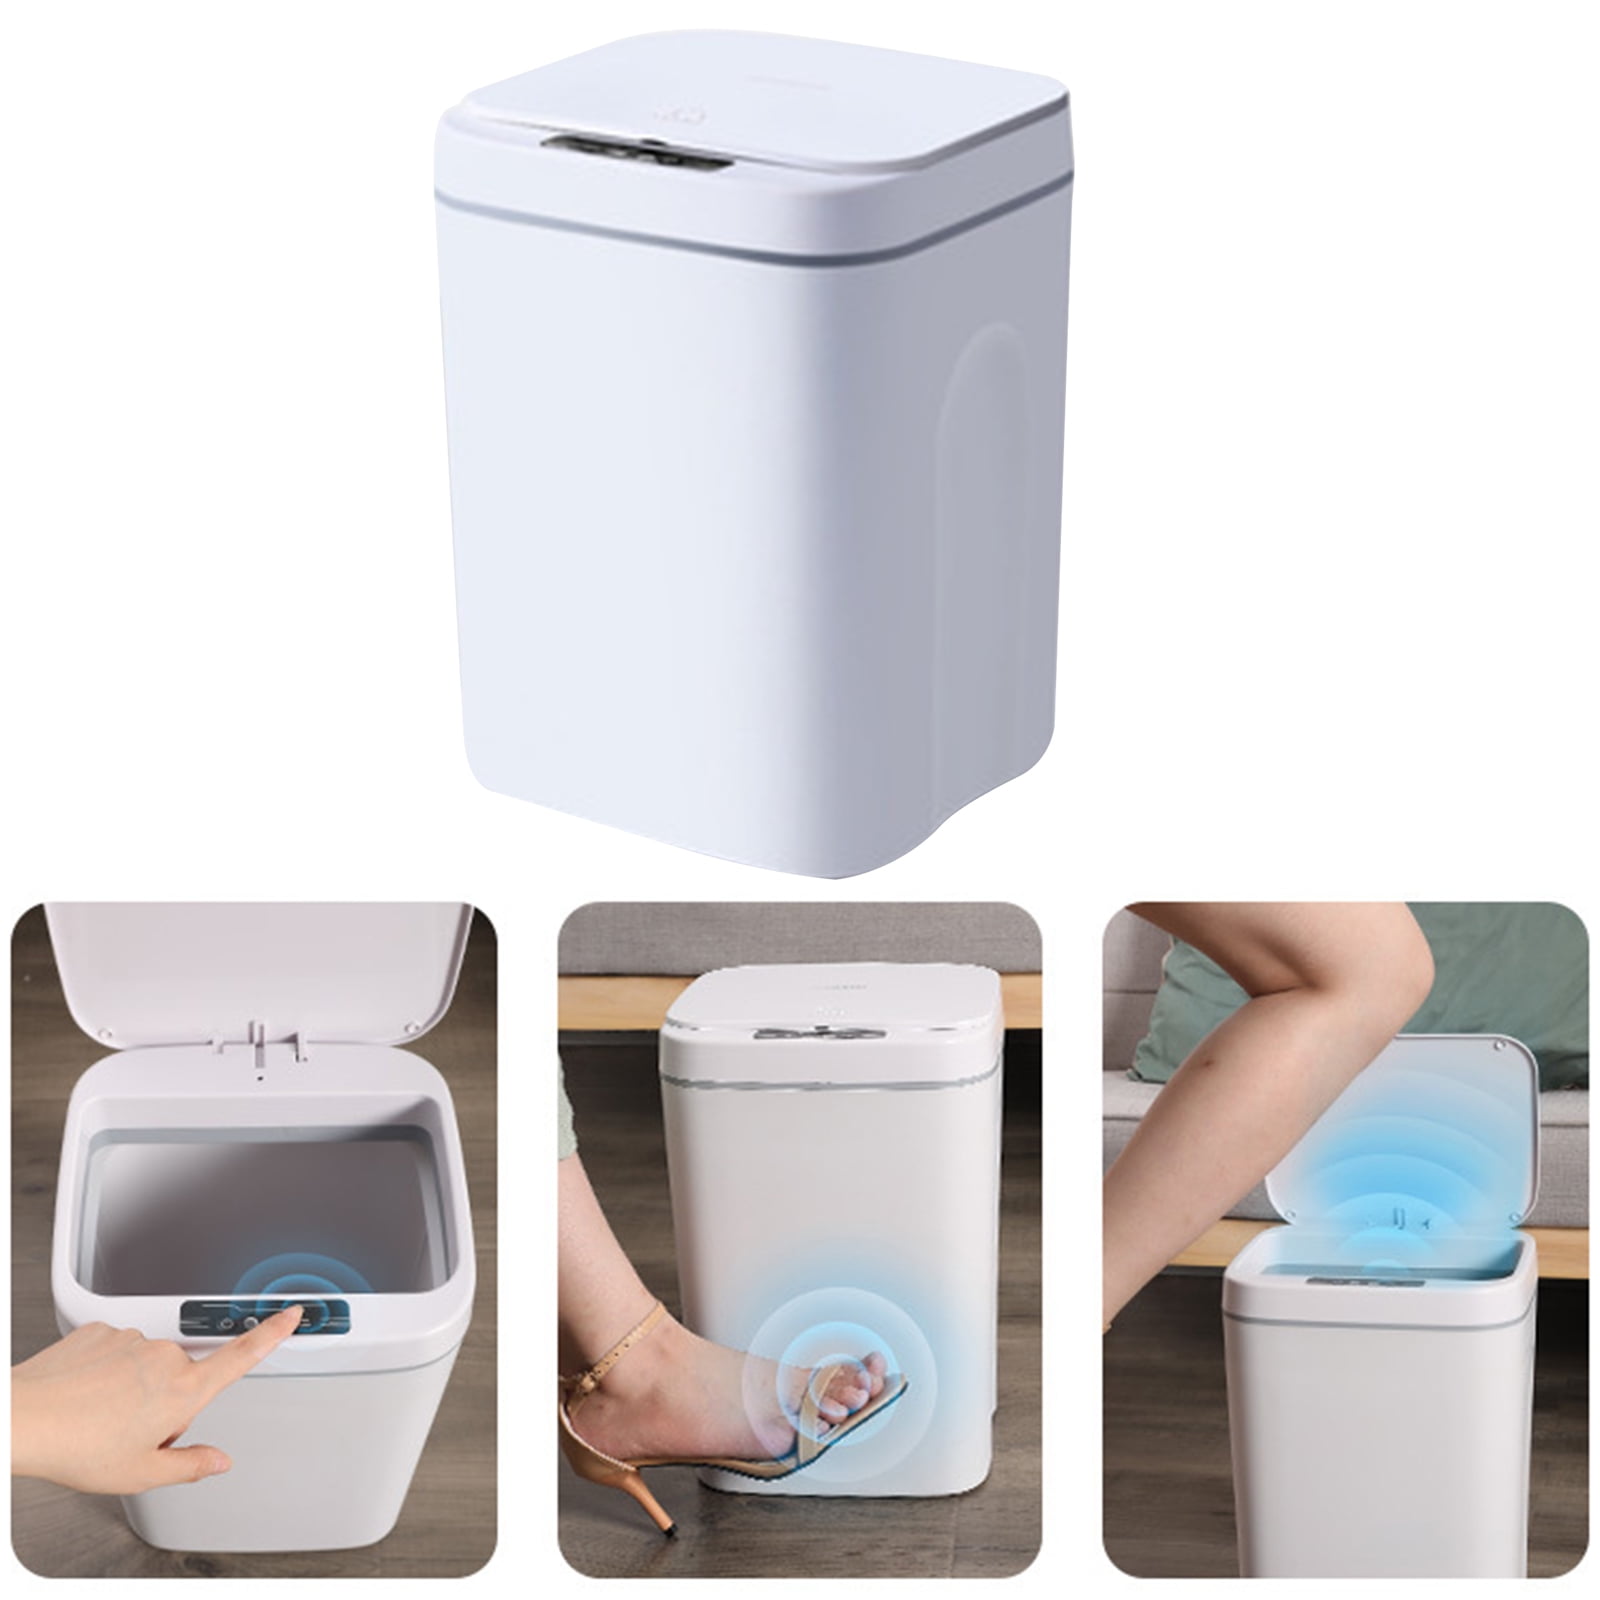 Details about   Large Automatic Touchless Bin Smart Induction Trash Can Kitchen Bathroom 